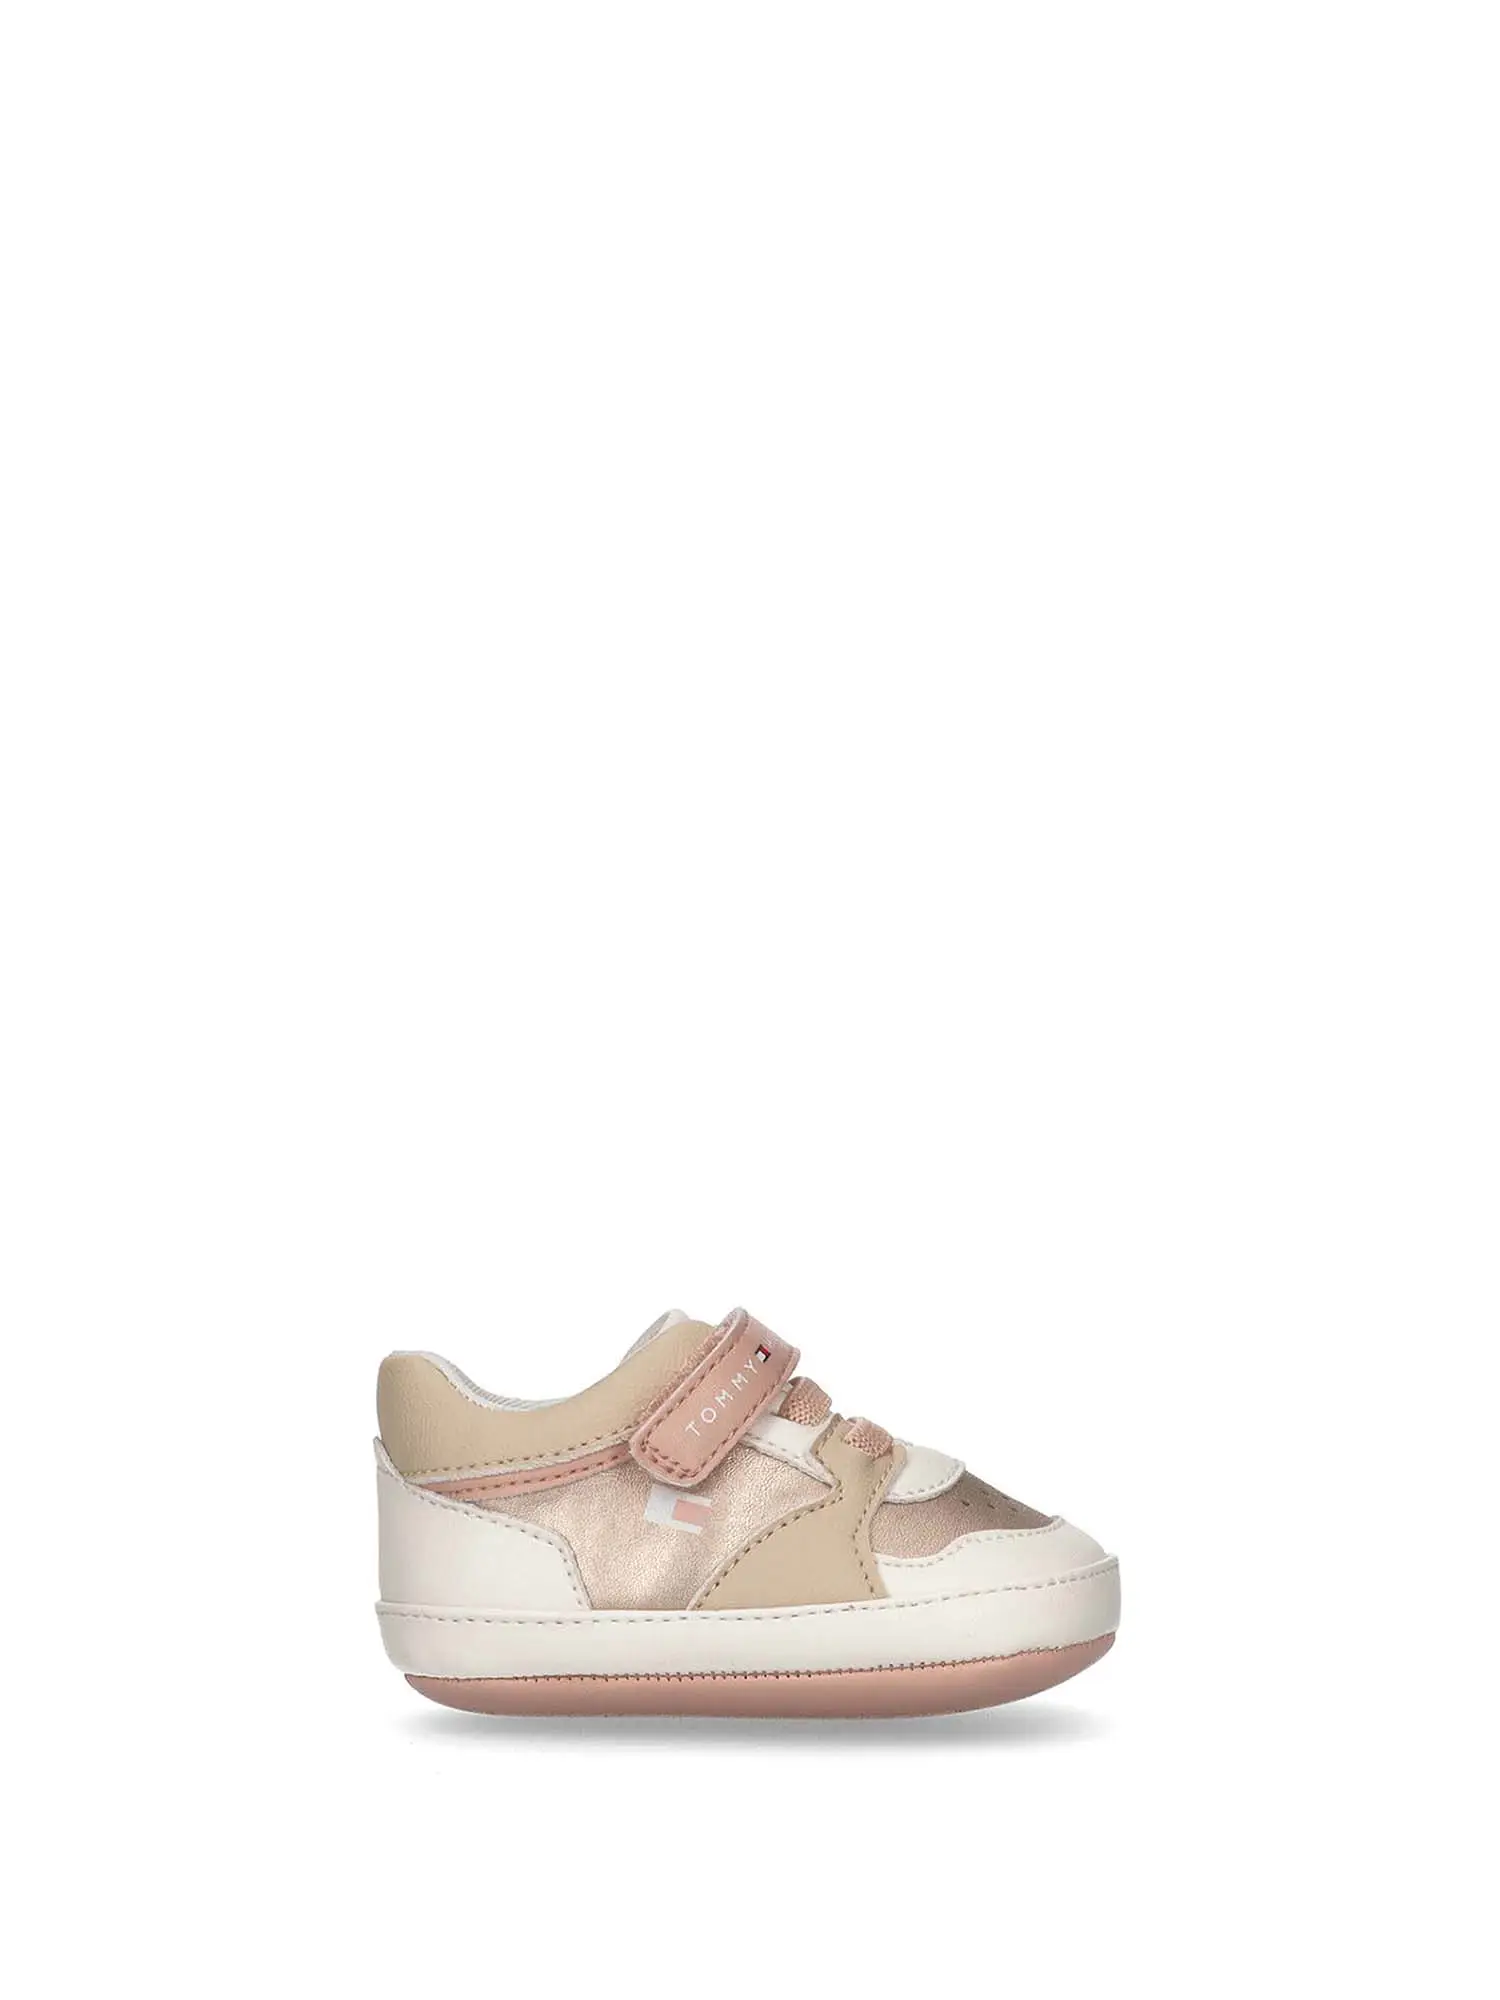 SNEAKERS BAMBINA - TOMMY HILFIGER - T0A9-33511-1433 - BIANCO/ROSA, 18